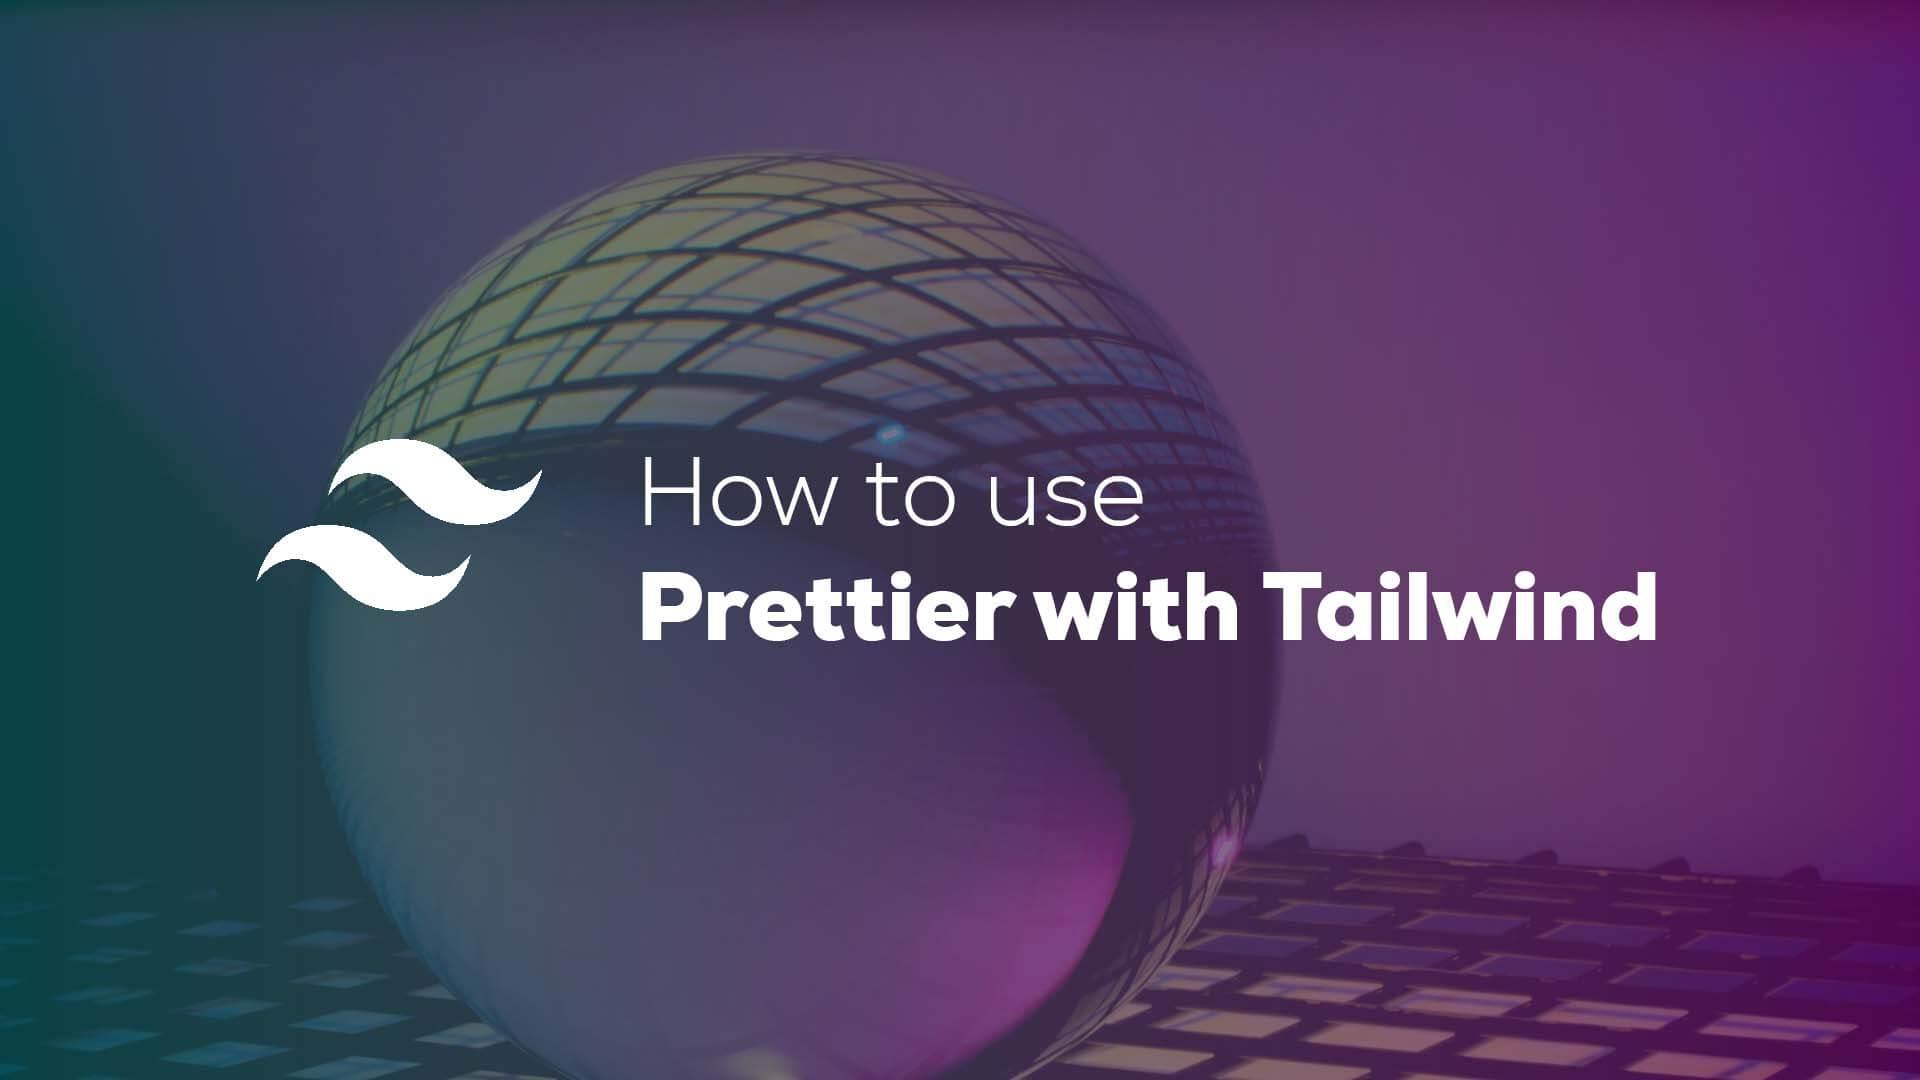 How to use Prettier with Tailwind